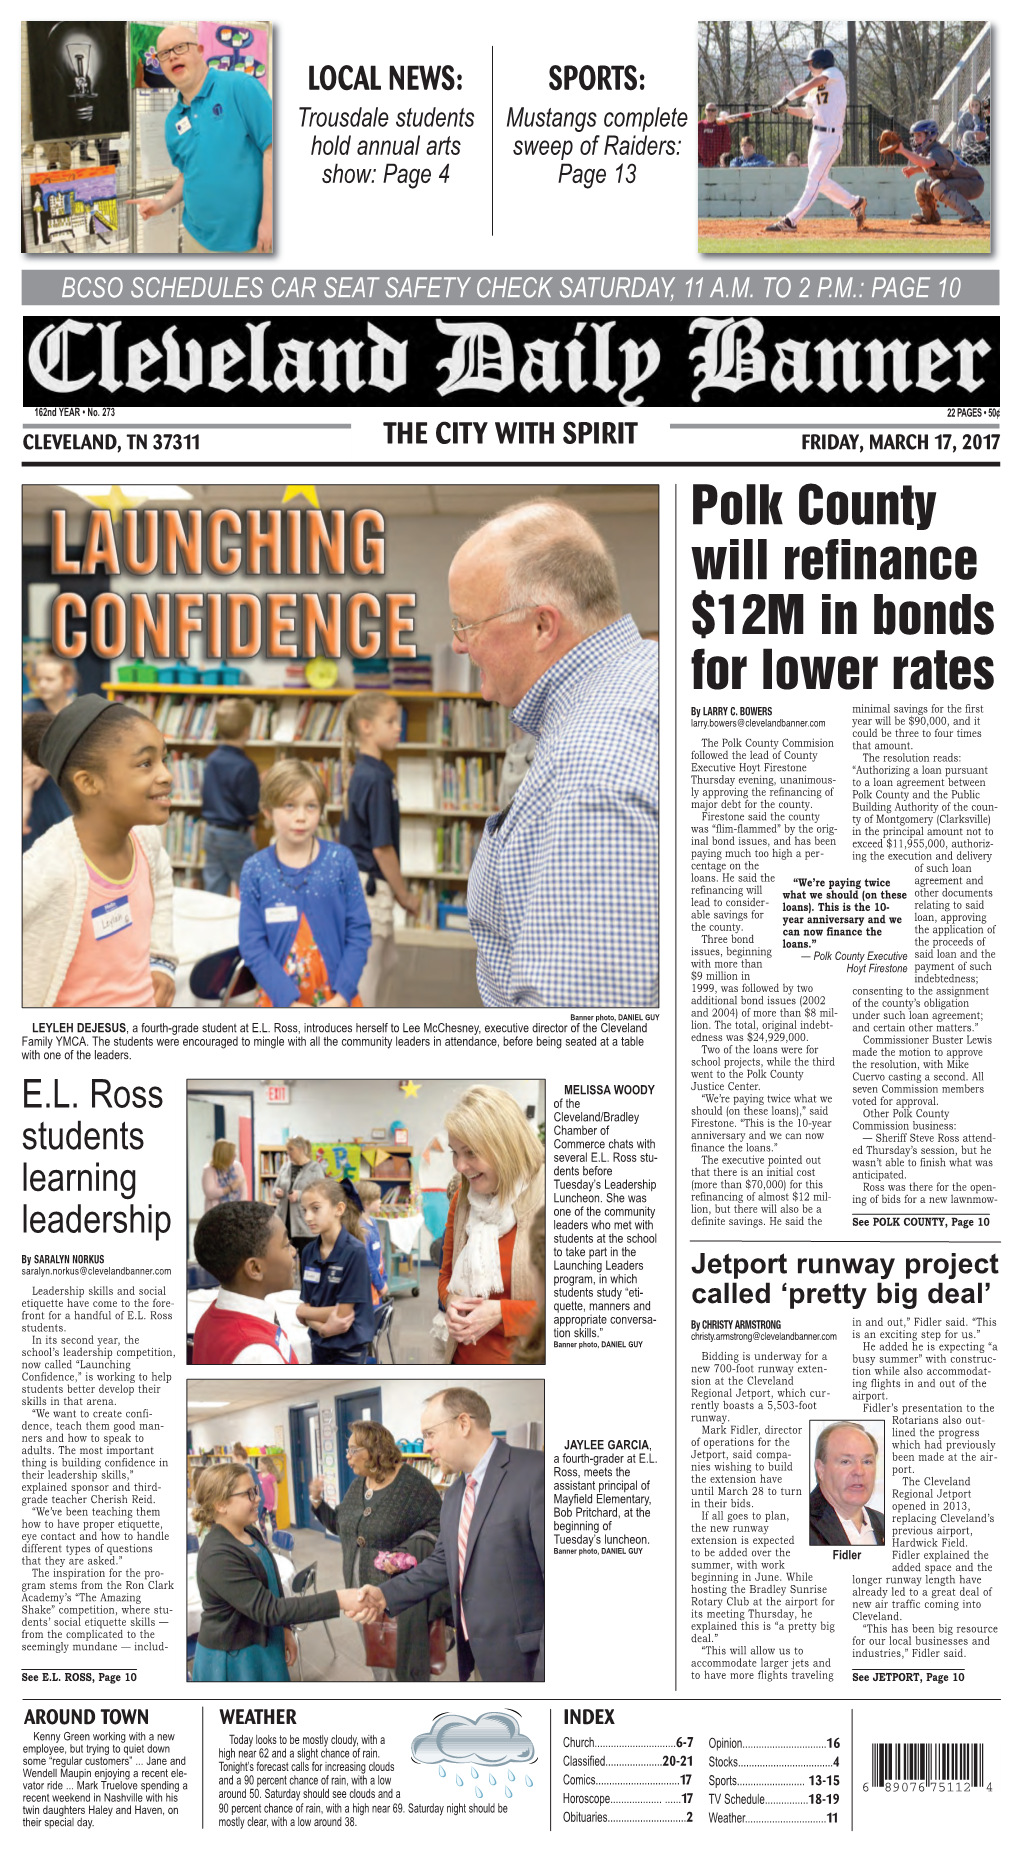 Polk County Will Refinance $12M in Bonds for Lower Rates